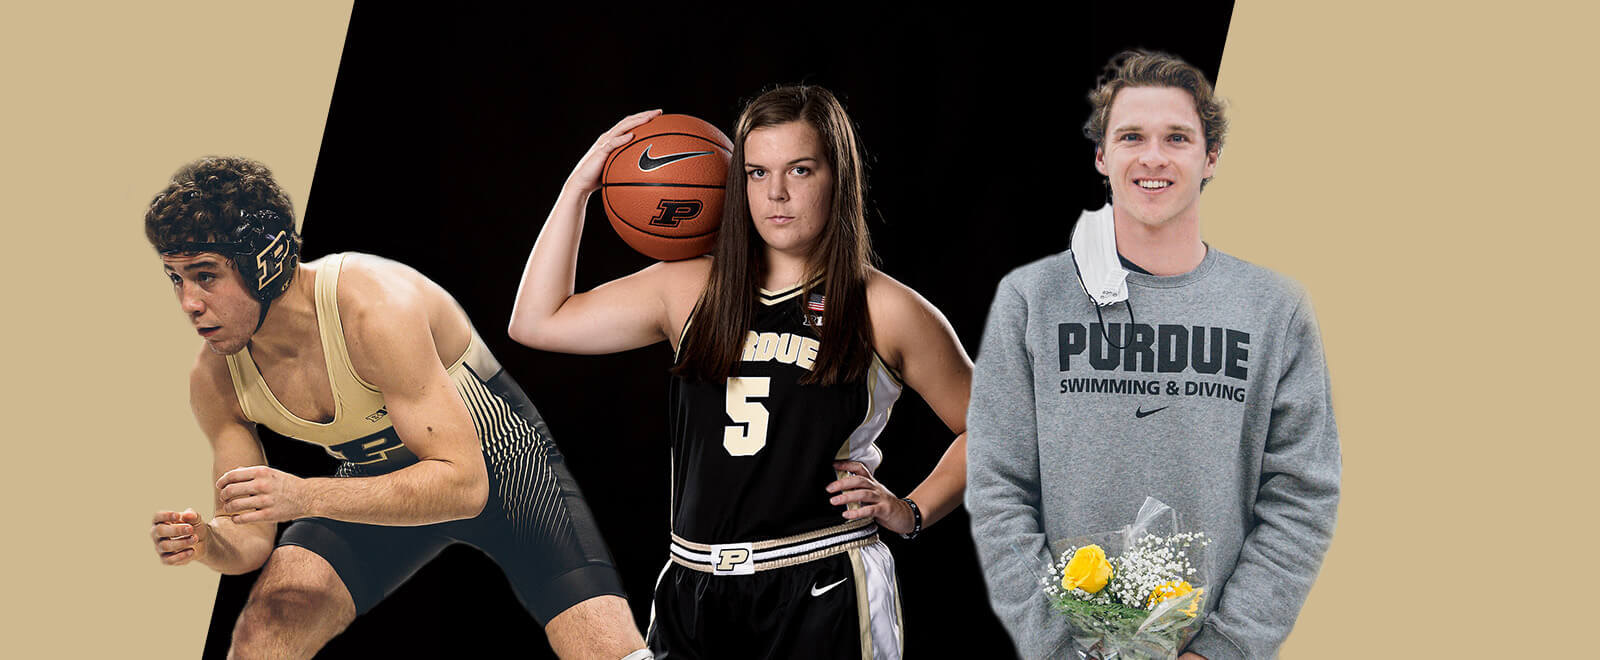 Purdue atletes Ethan Smiley in wrestling, Cassidy Hardin in basketball and Nathan Barsanti in swimming  